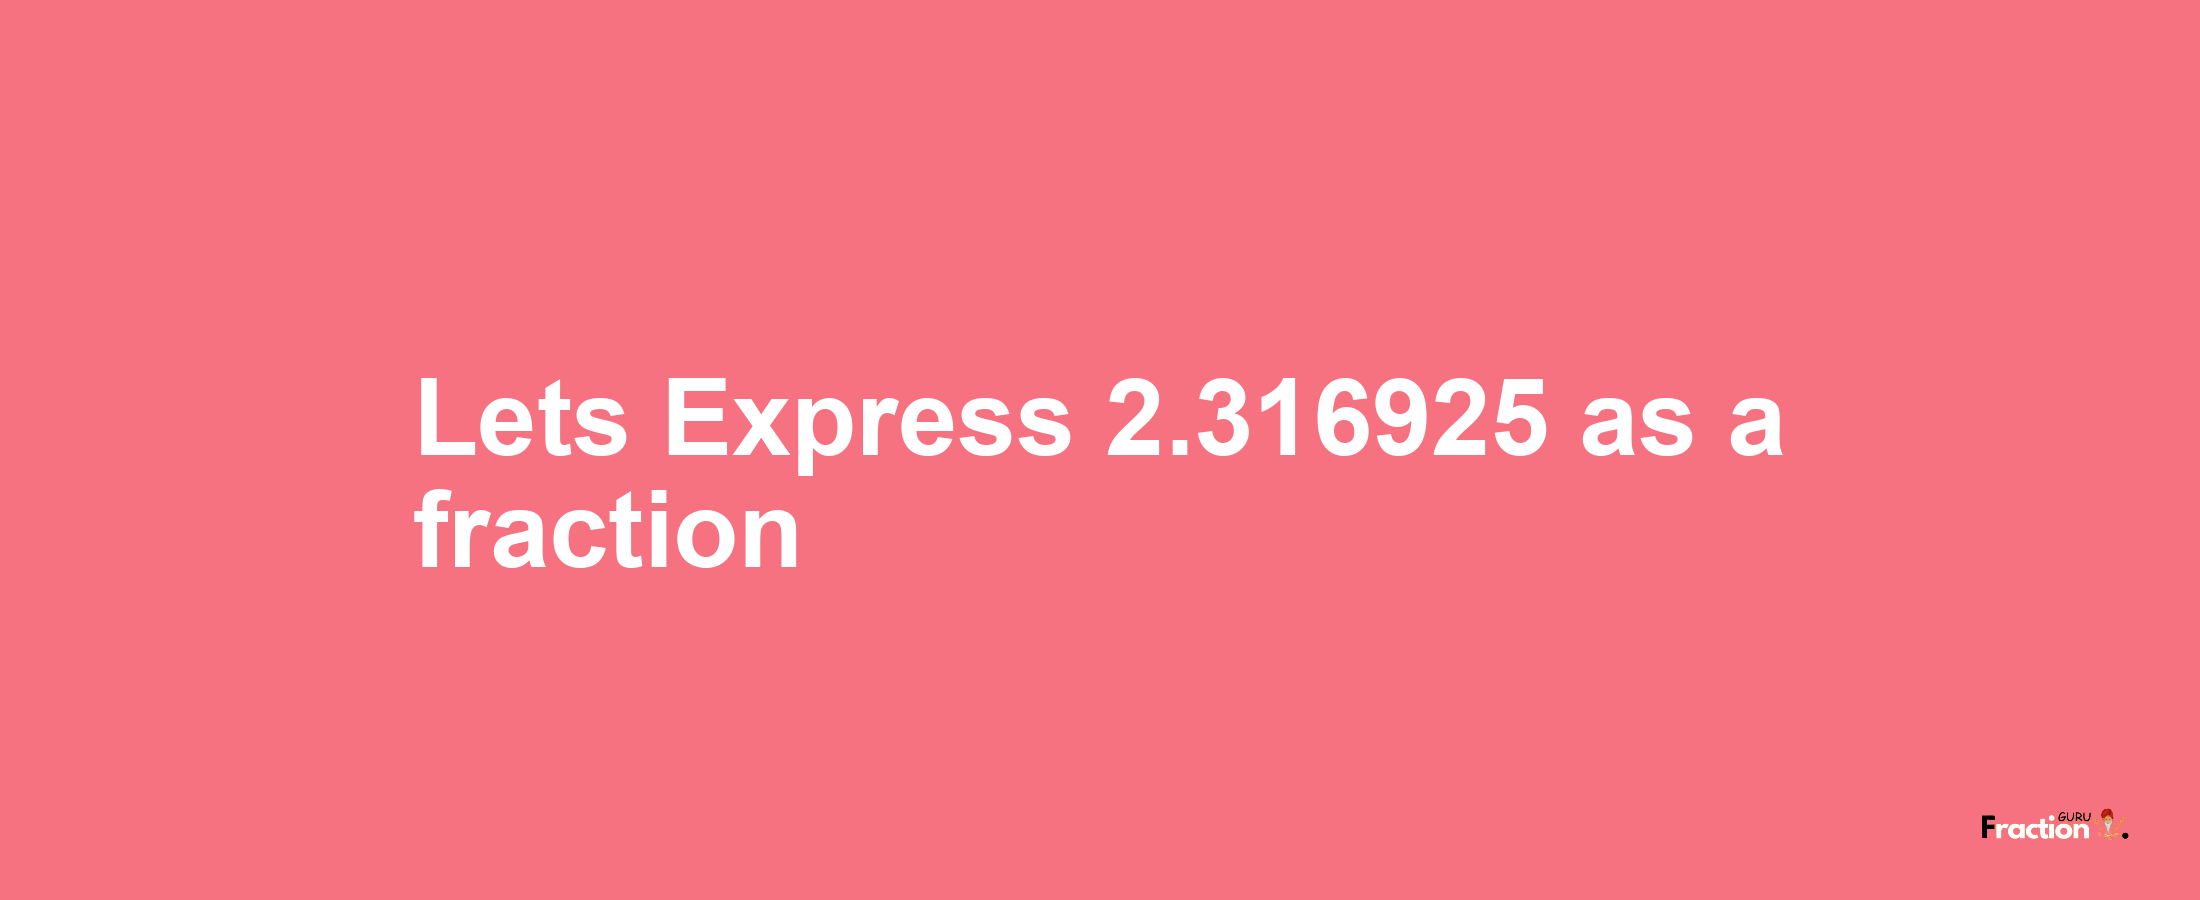 Lets Express 2.316925 as afraction